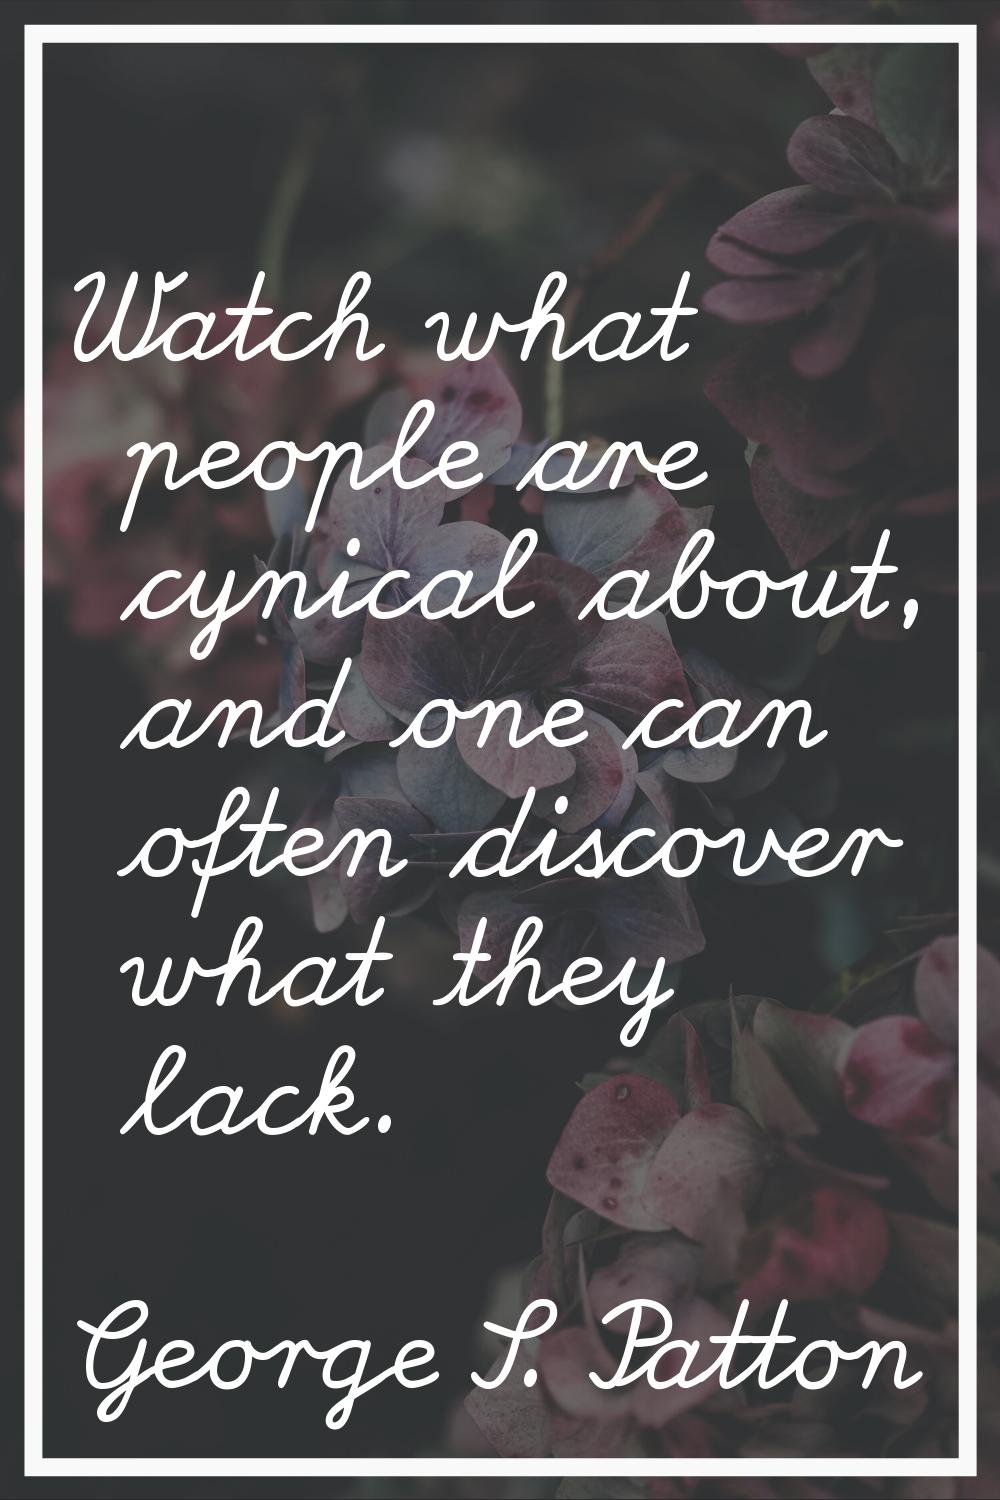 Watch what people are cynical about, and one can often discover what they lack.